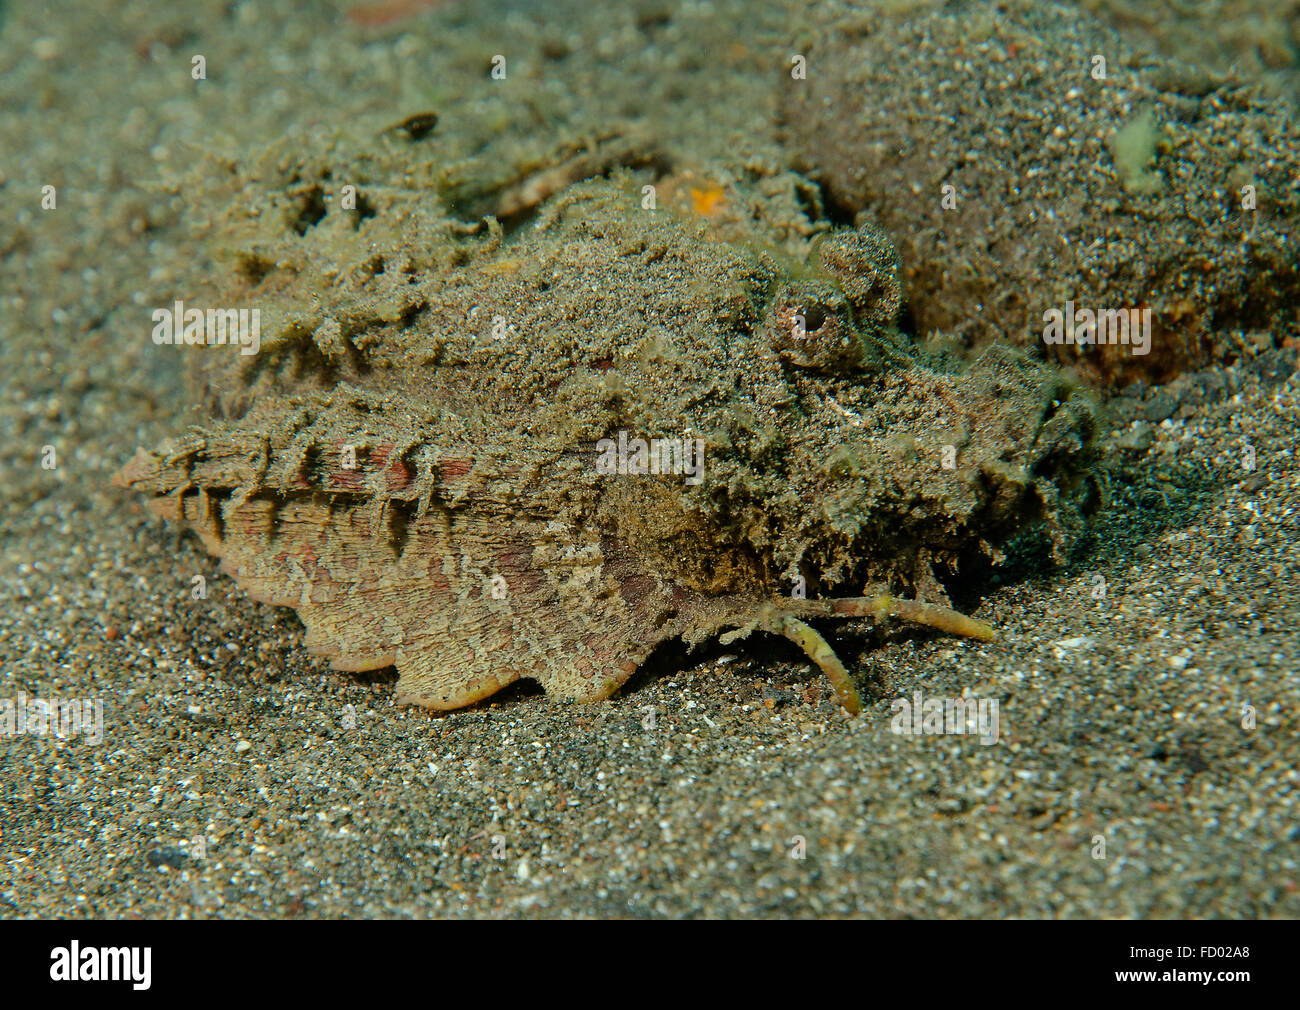 Demon stinger scorpionfish, Inimicus didactylus, side view on sand in Tulamben, Bali, Indonesia Stock Photo